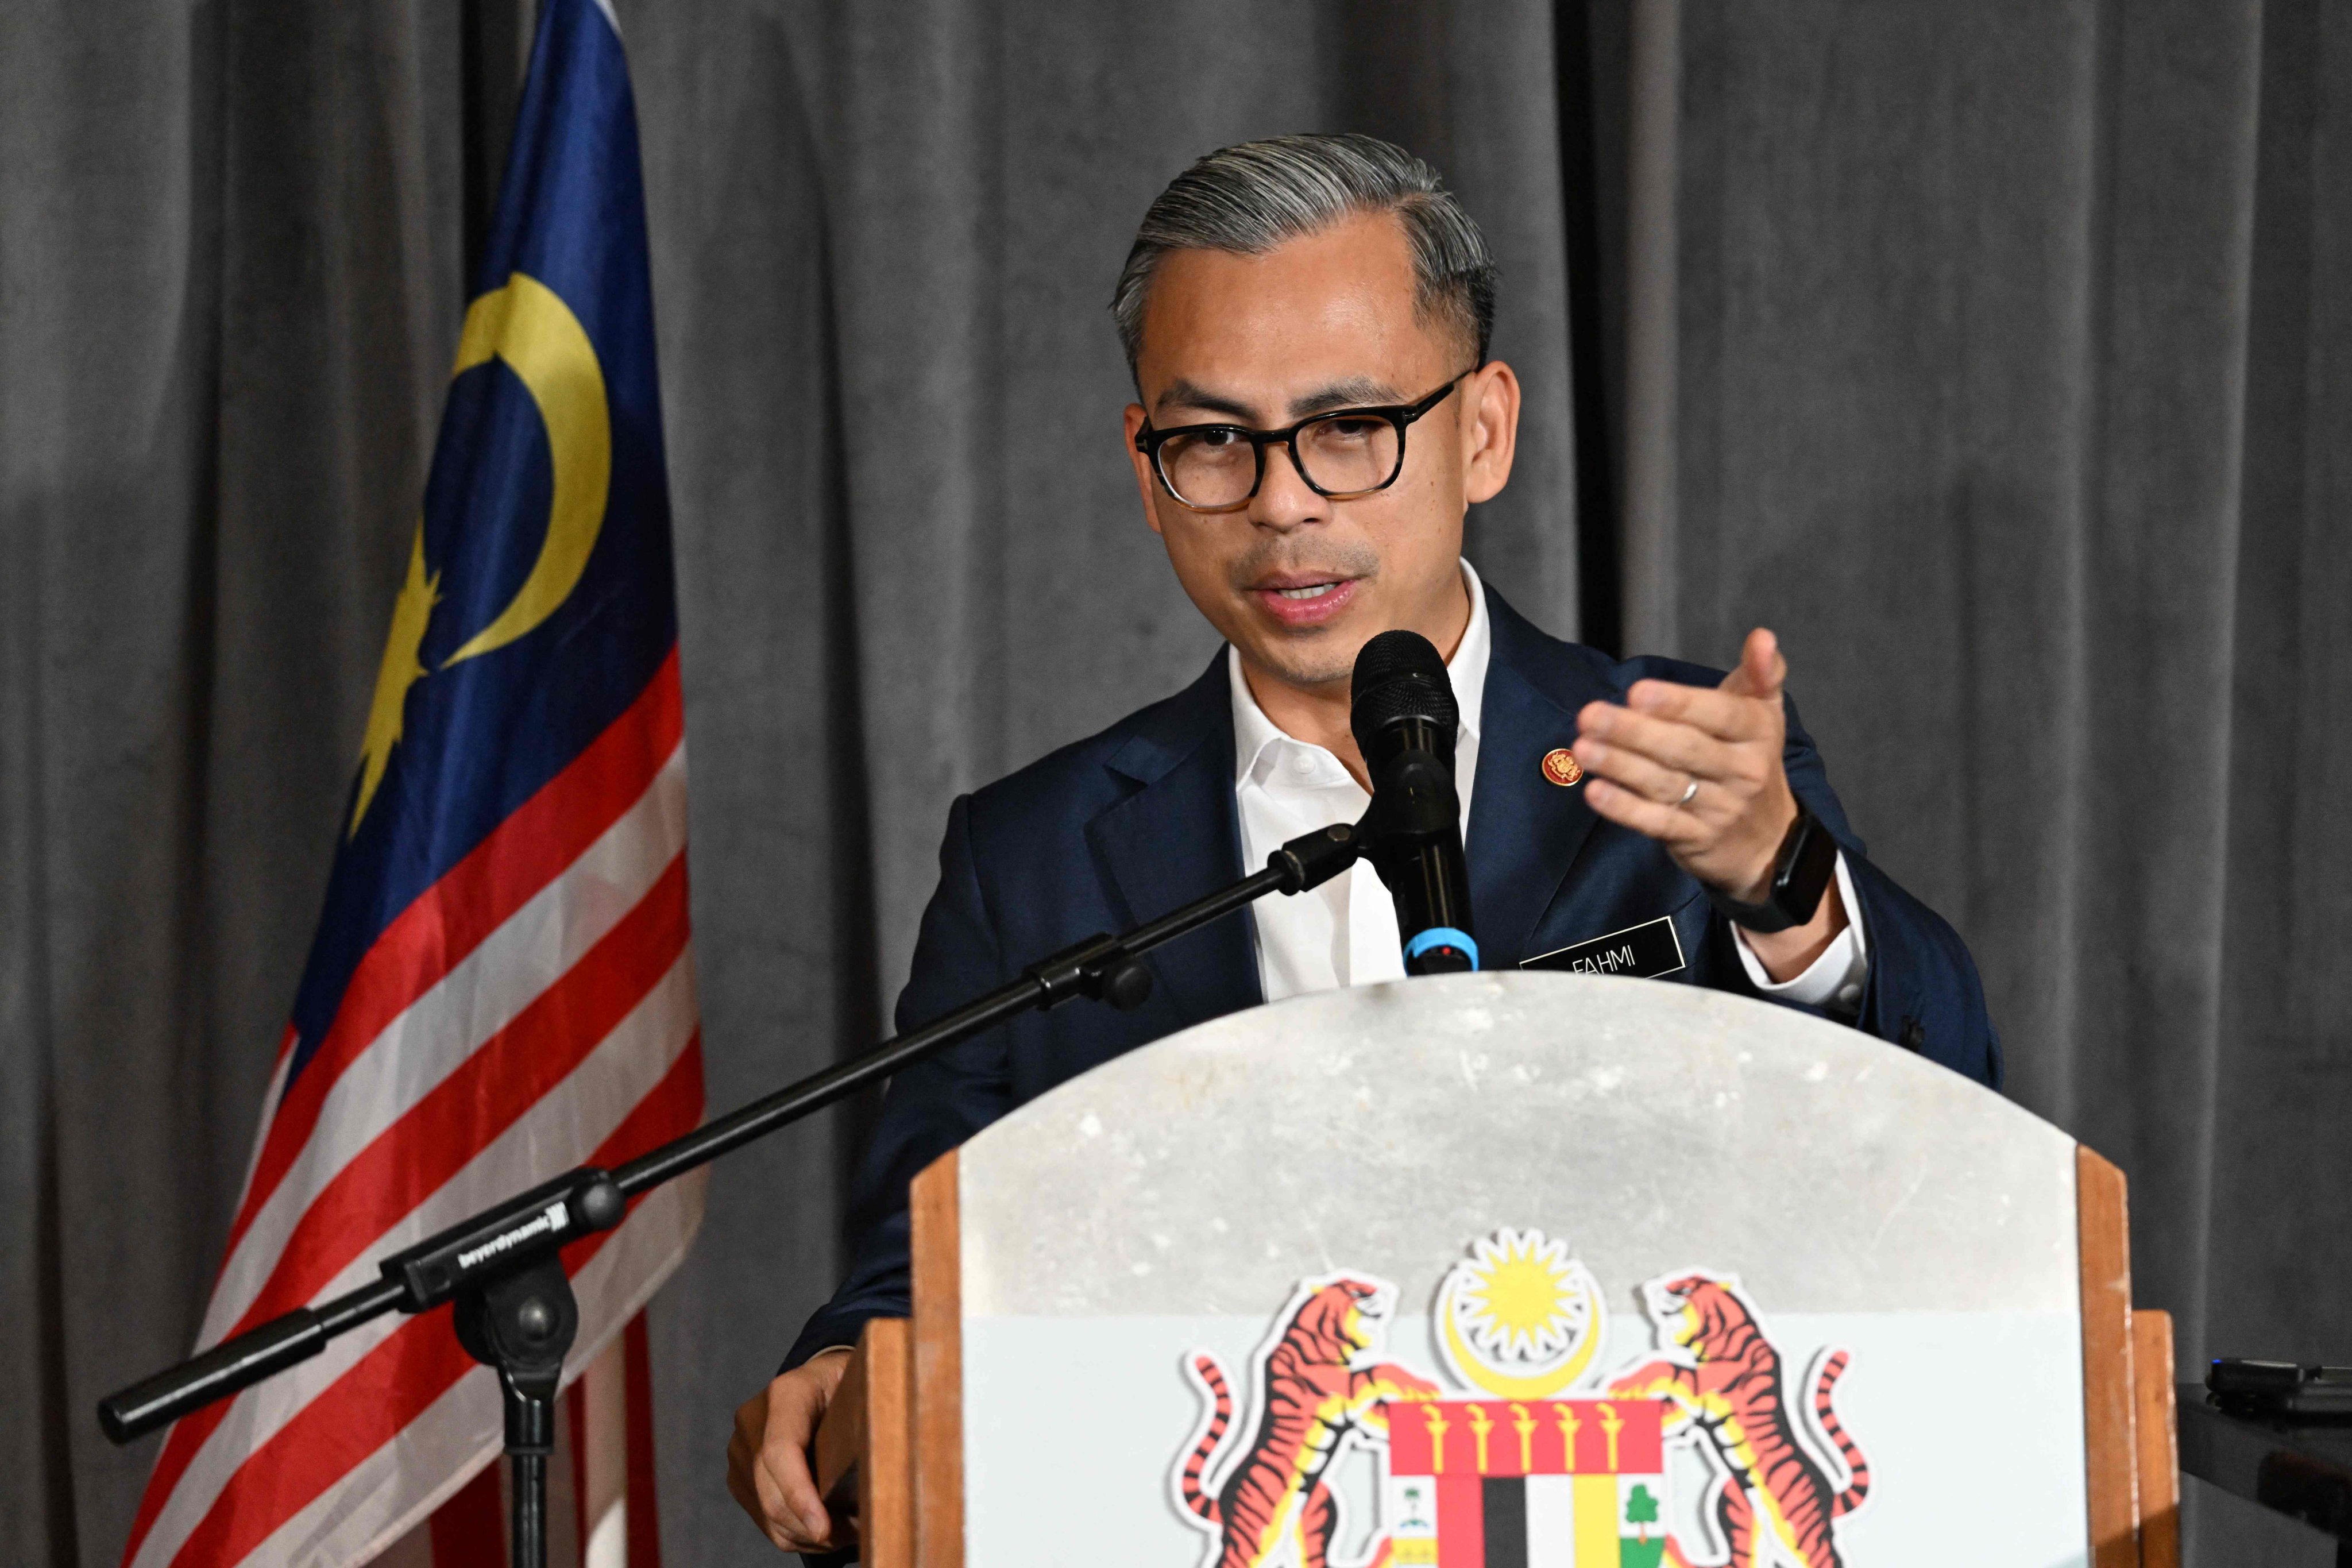 Malaysia’s Communications Minister Fahmi Fadzil during an event in Kuala Lumpur in March. Photo: AFP